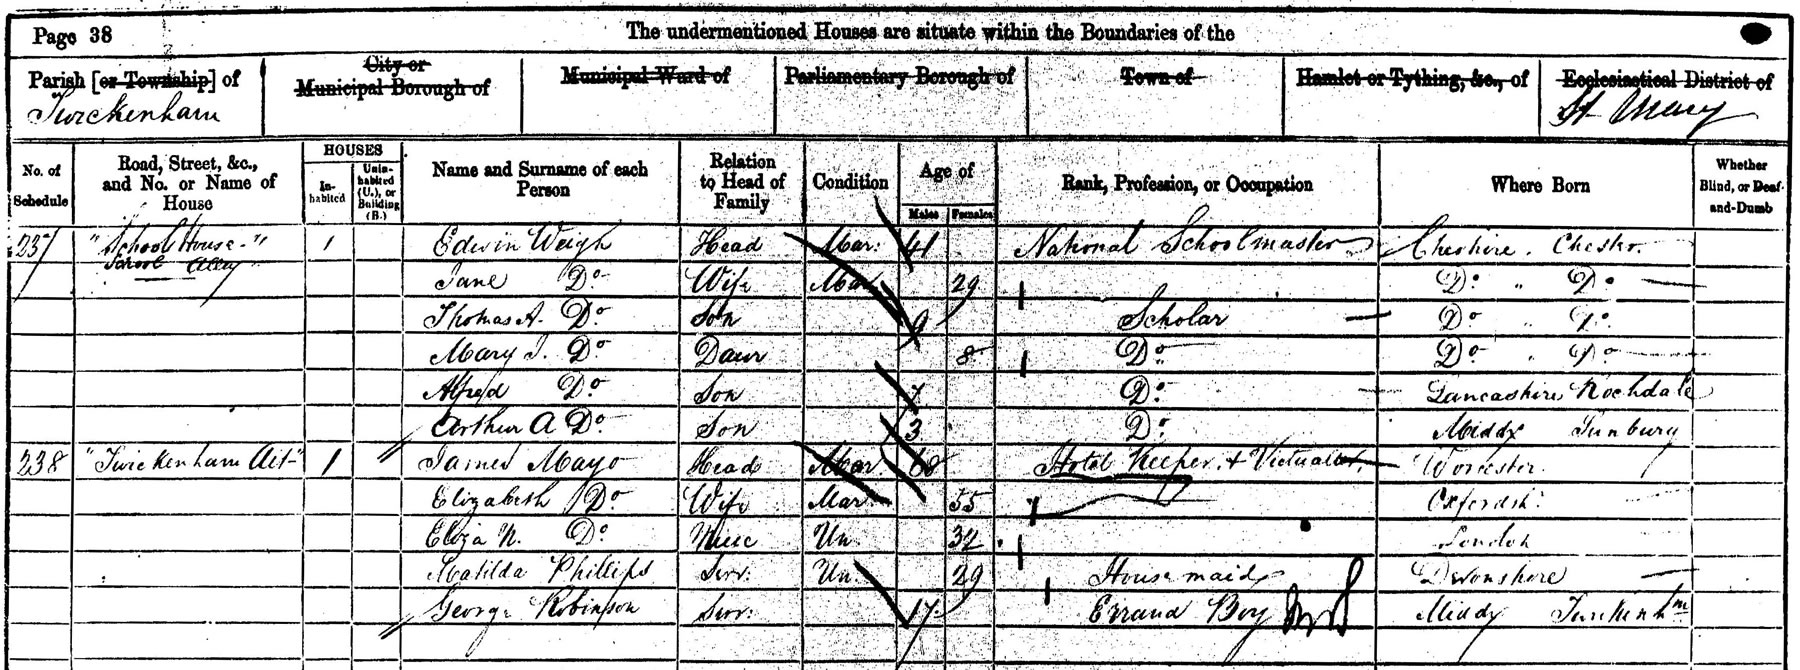 James Mayo and family in the 1861 census of Twickenham